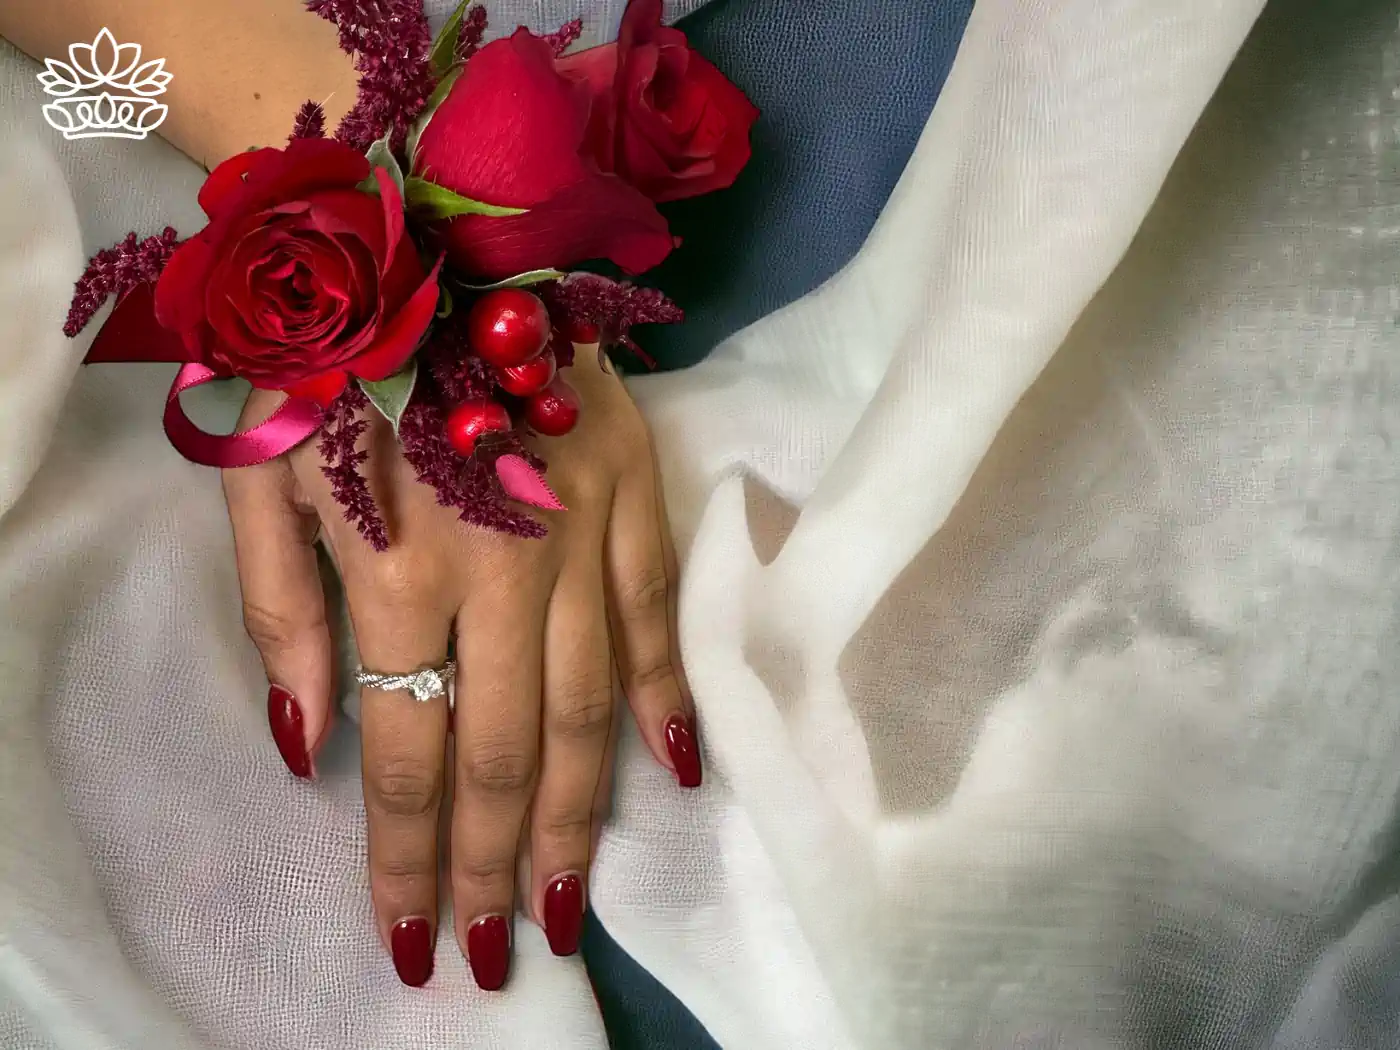 A close-up of a hand adorned with vibrant red nail polish and a sparkling engagement ring, gracefully holding a stunning arrangement of deep red roses and lush, textured accents, symbolizing elegance and celebration. Fabulous Flowers and Gifts - Matric Dance. Delivered with Heart.